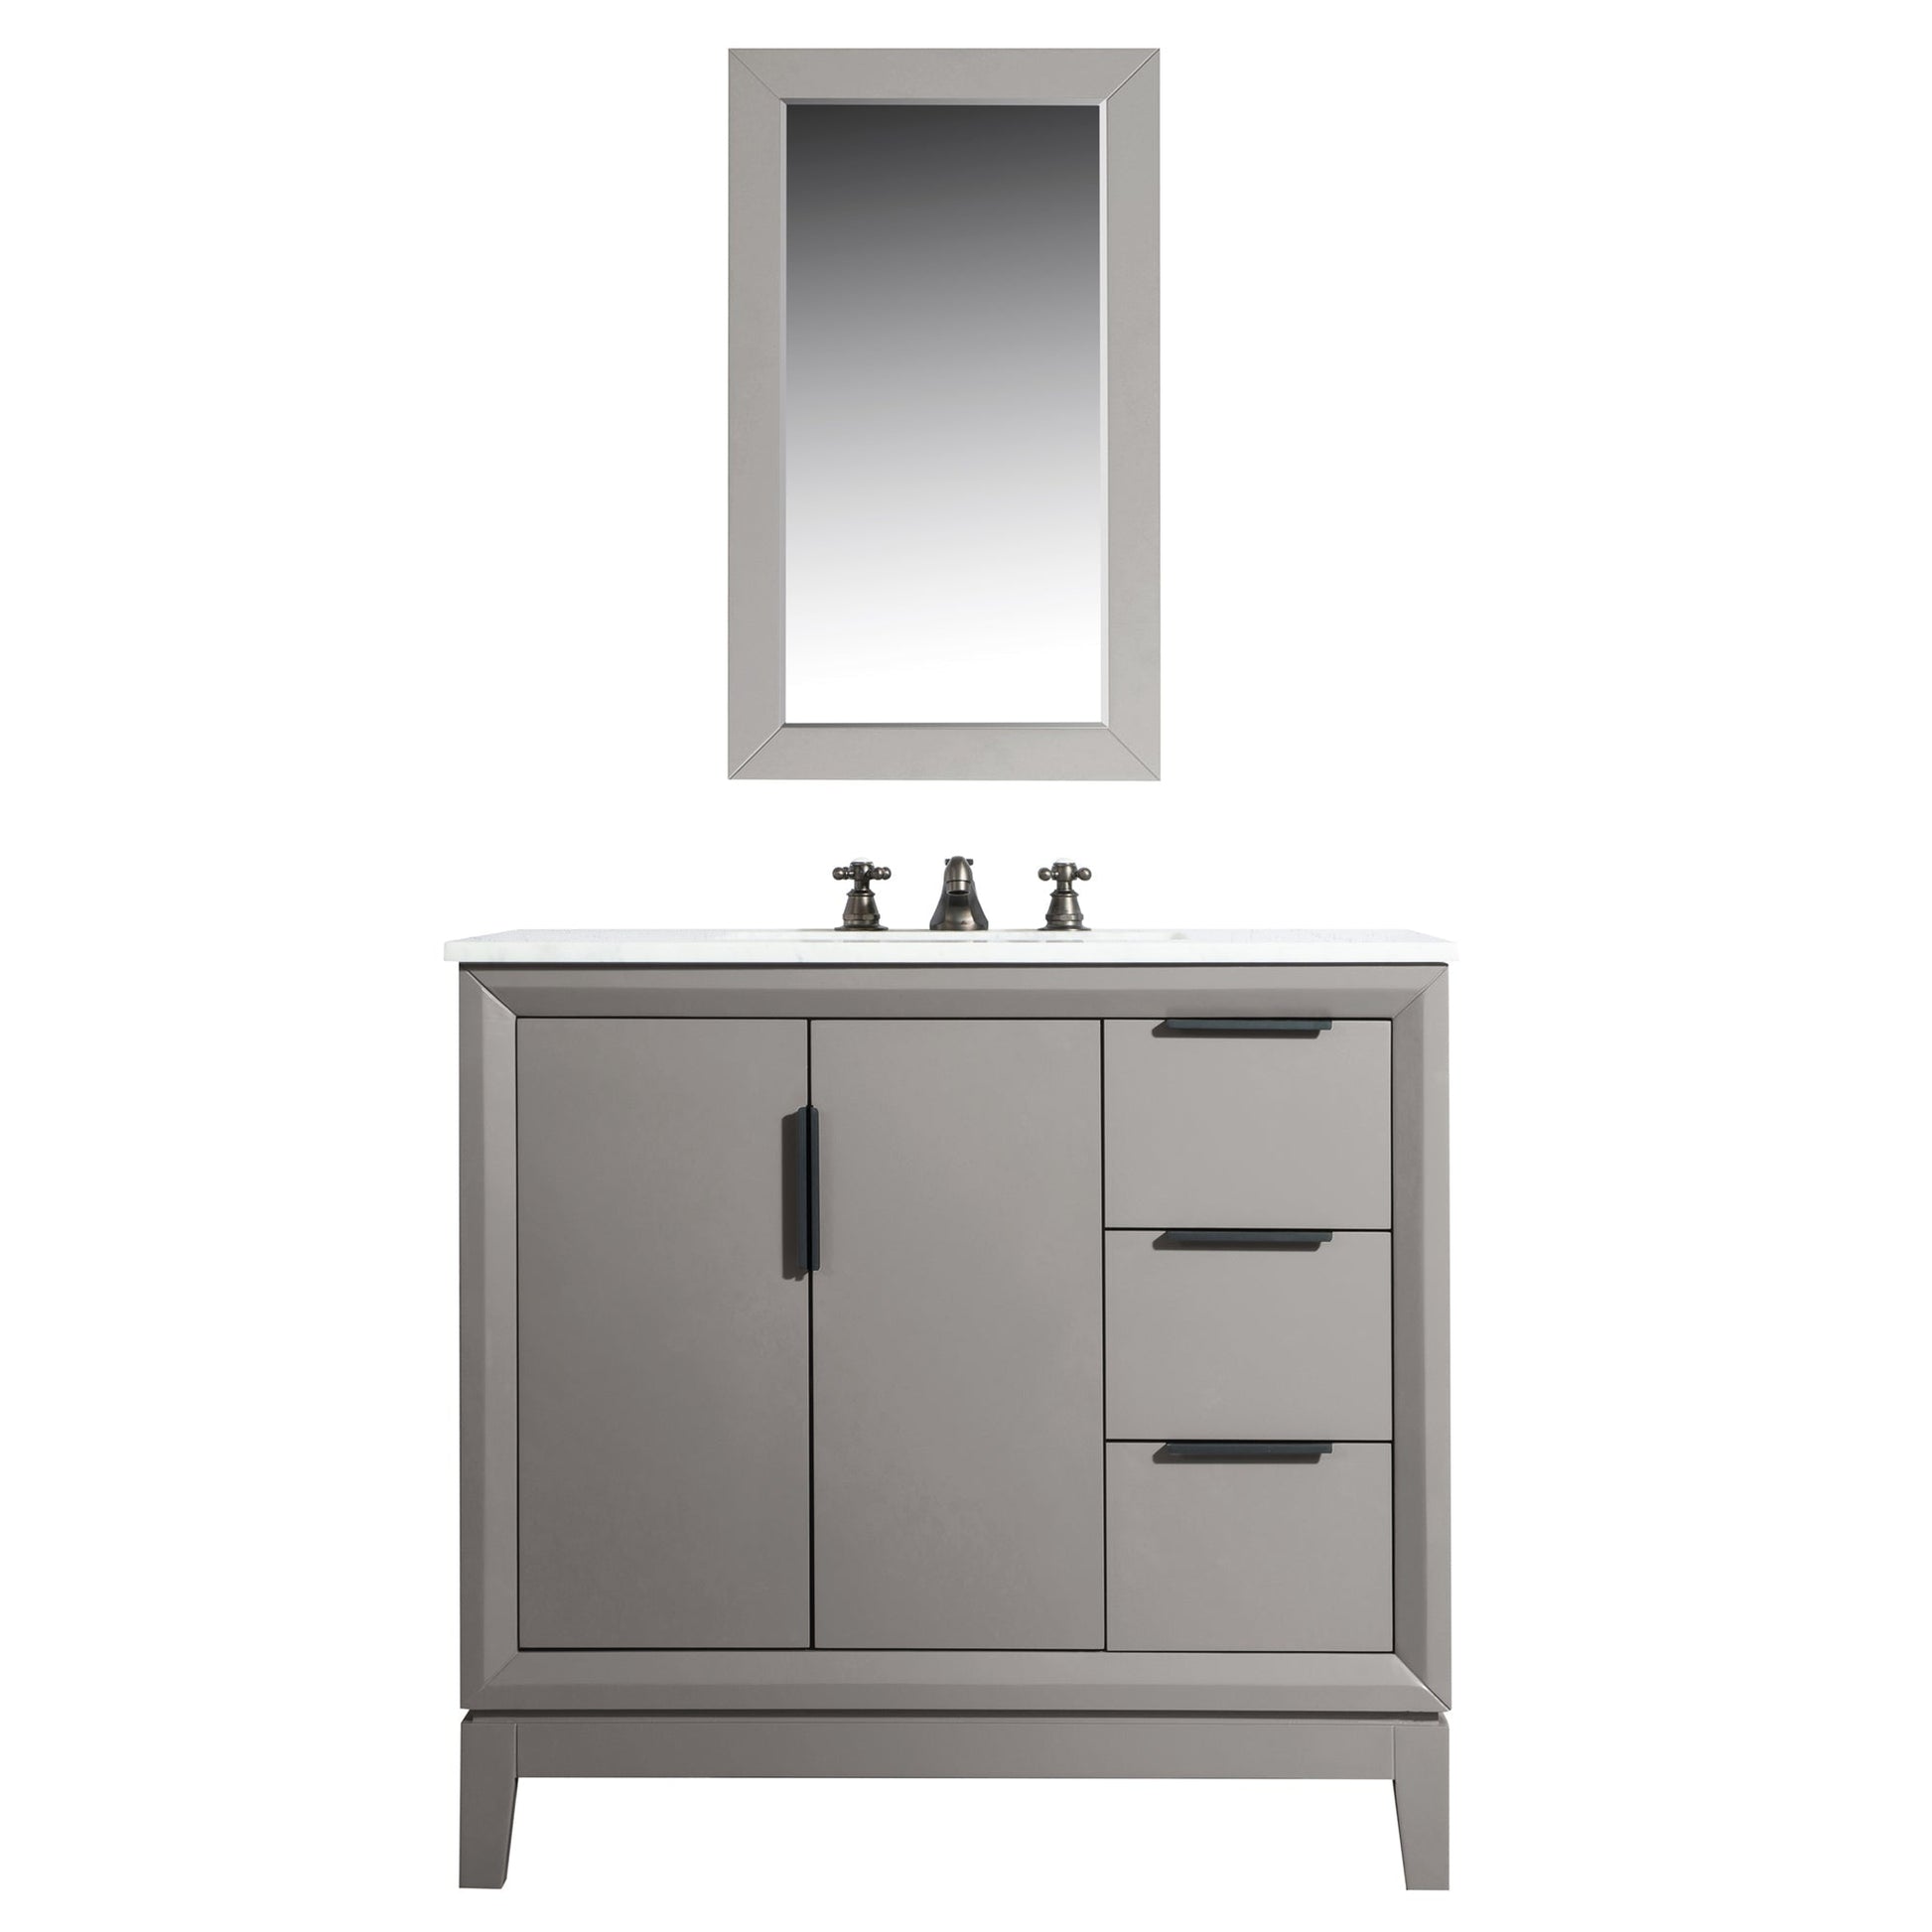 Water Creation Elizabeth 36" Single Sink Carrara White Marble Vanity In Cashmere Grey With Matching Mirror and F2-0009-03-BX Lavatory Faucet